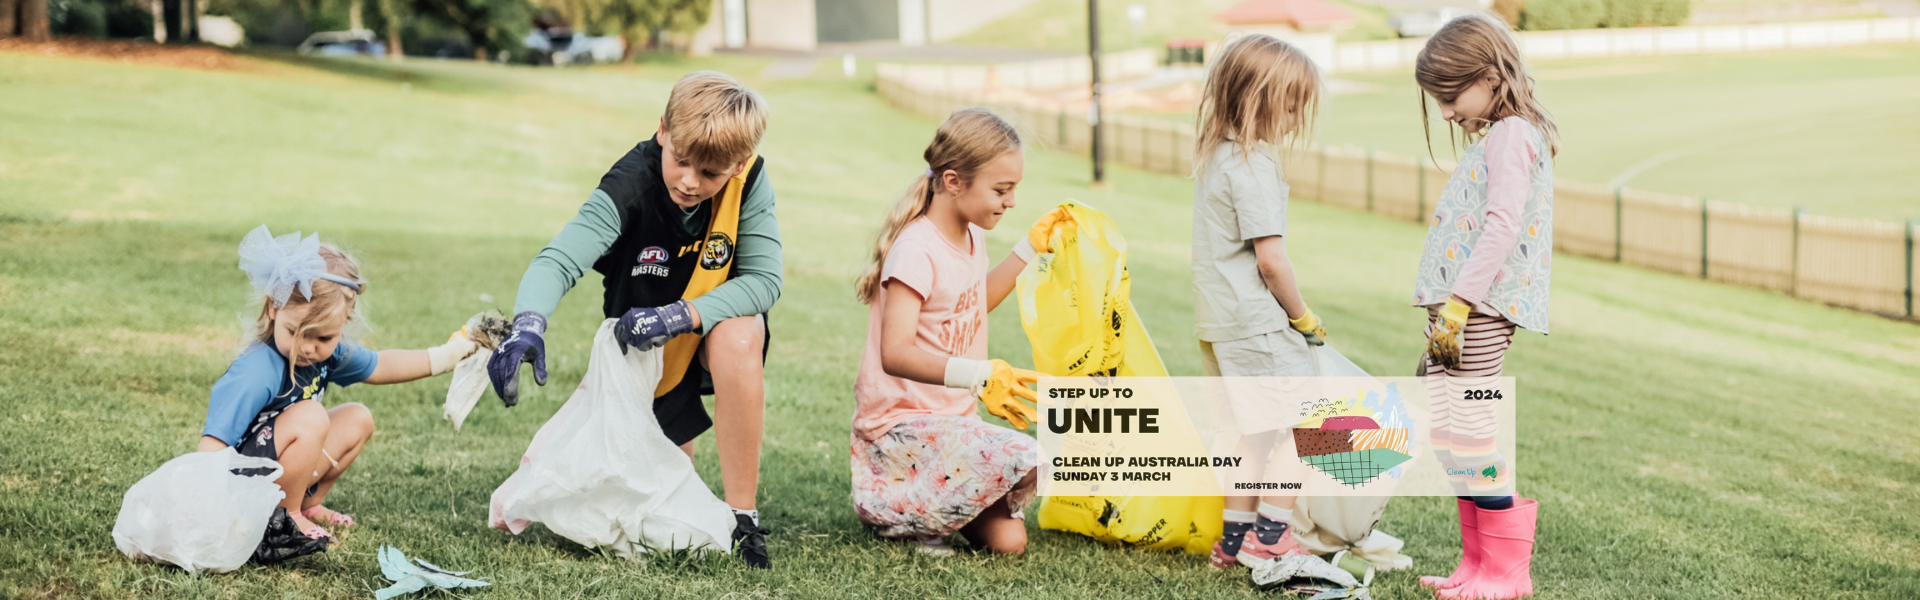 Clean up Australia Day 2024 home page banner 